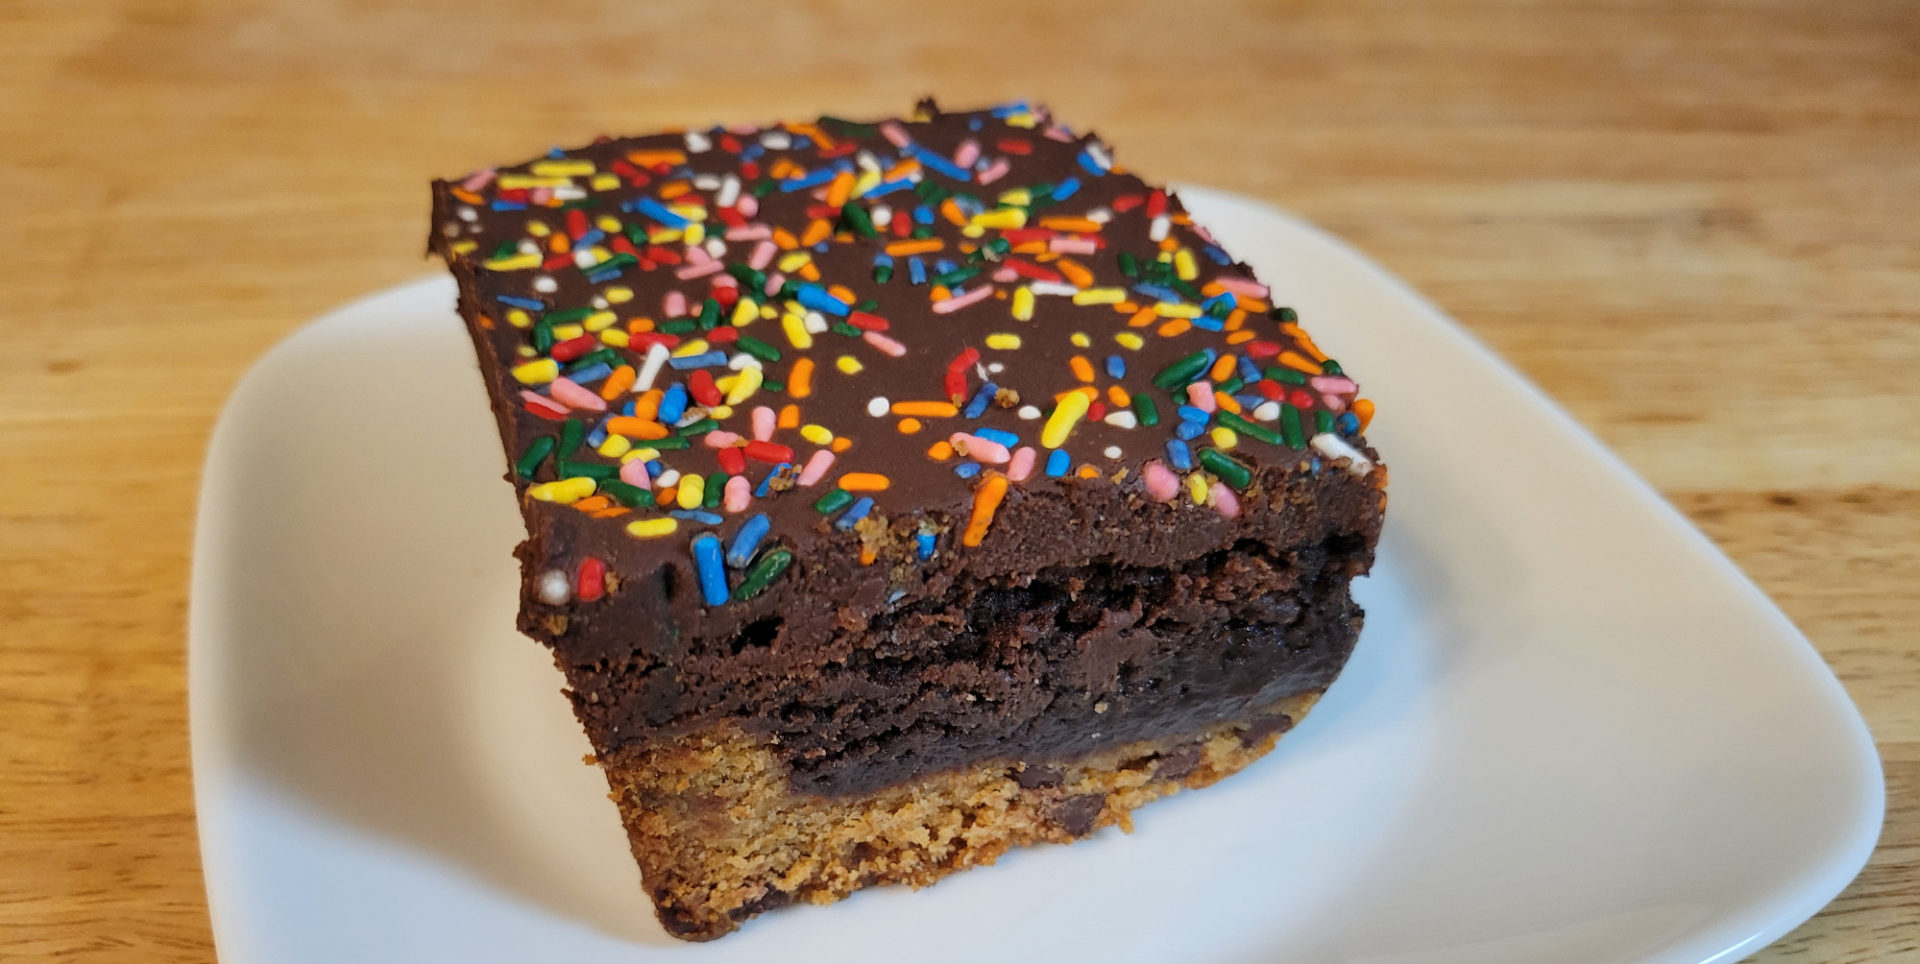 A College Brownie taking up a large portion of a small plate.